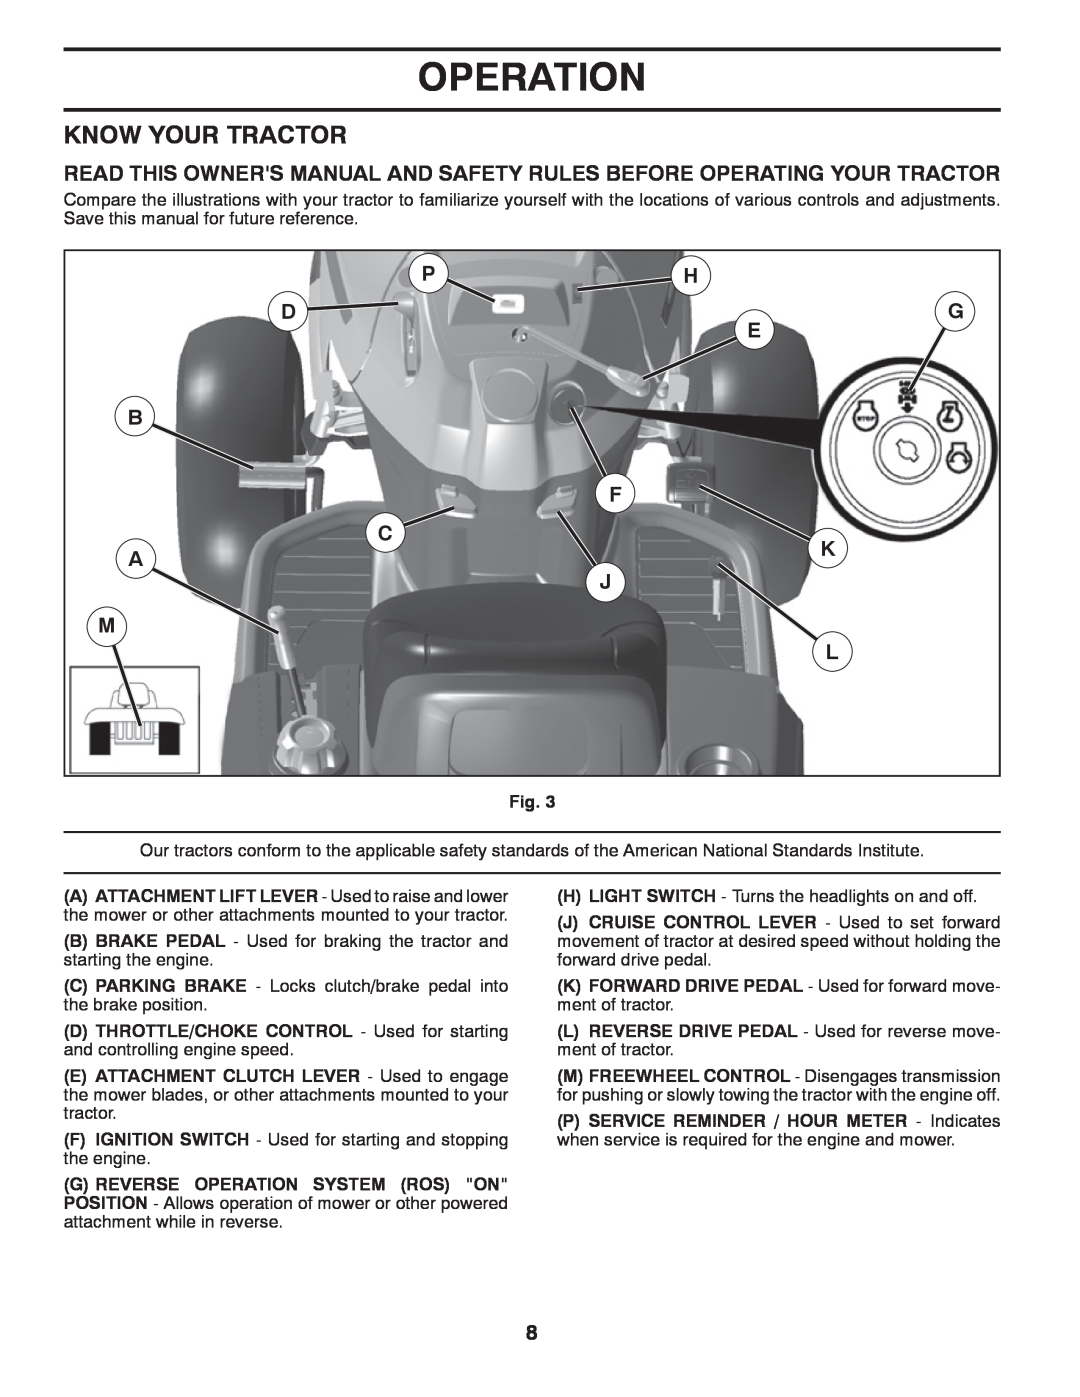 Husqvarna 917.24046 owner manual Know Your Tractor, Operation 